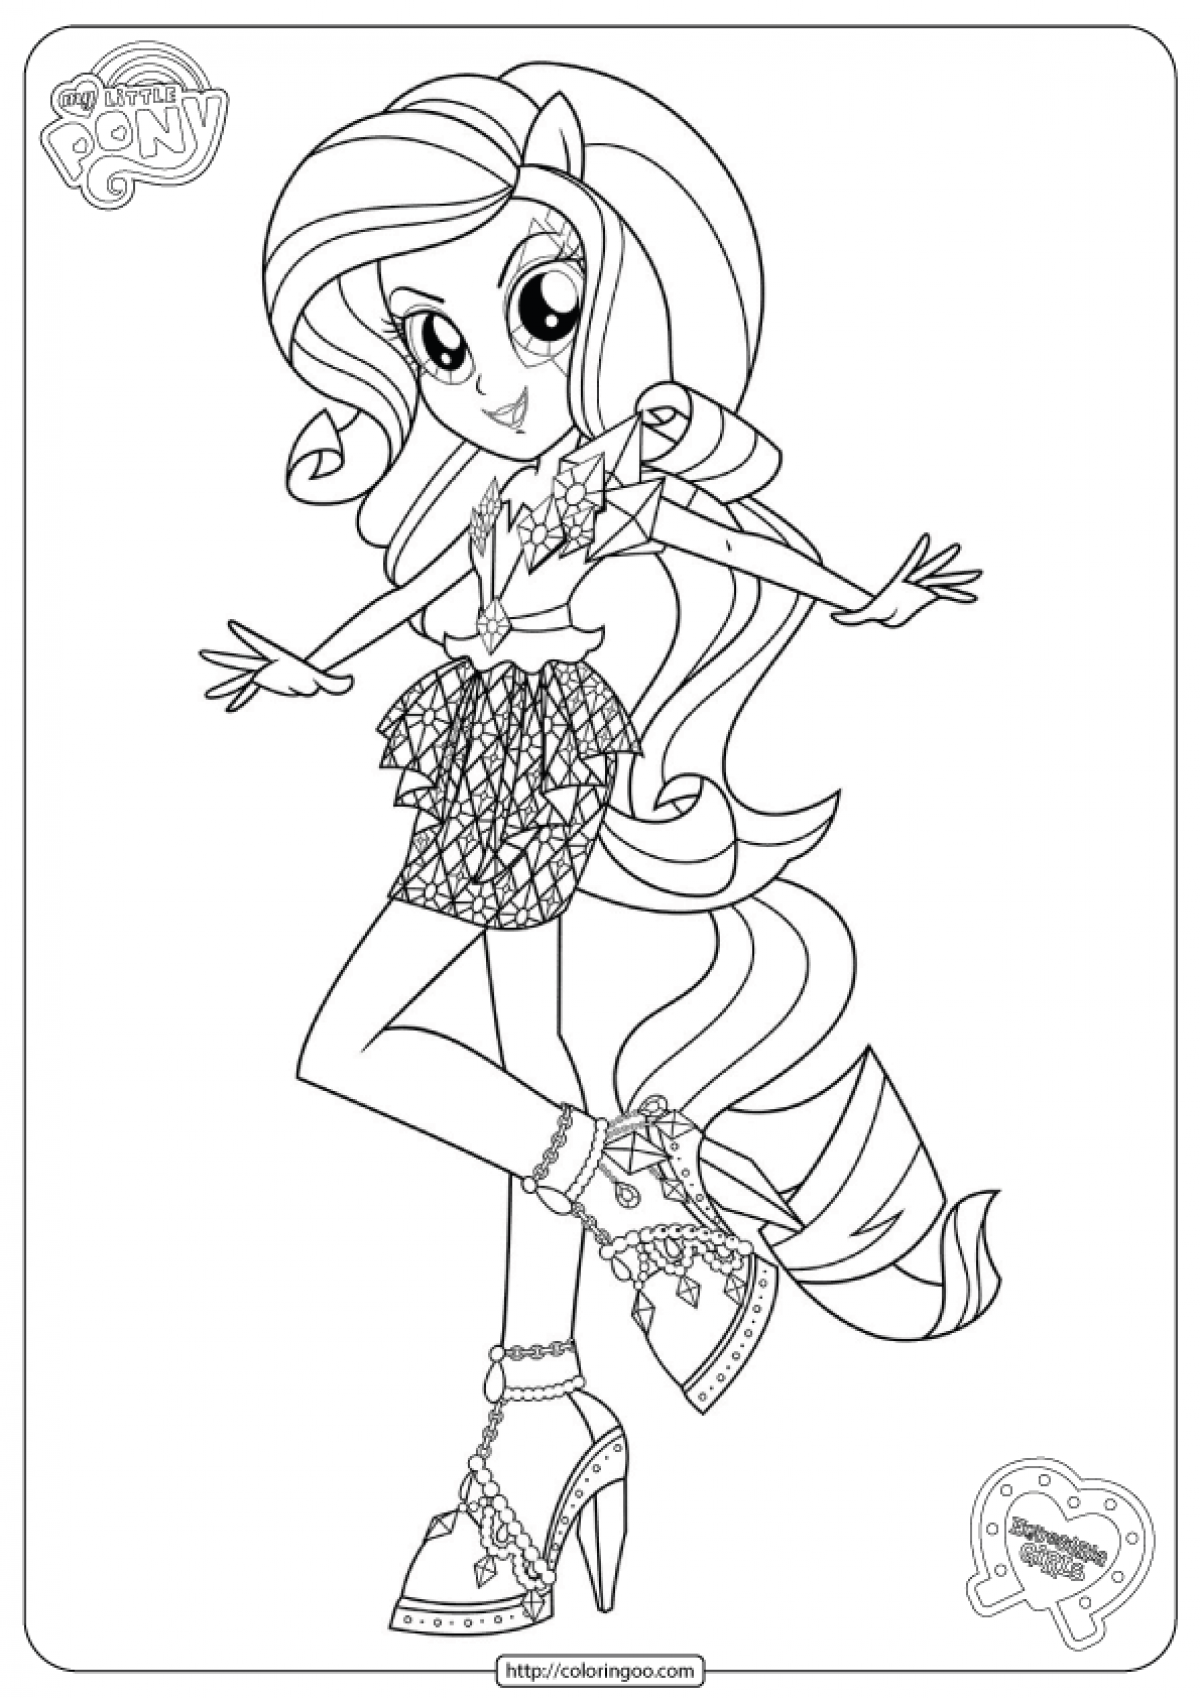 Rainbow High Coloring Pages - Coloring Home